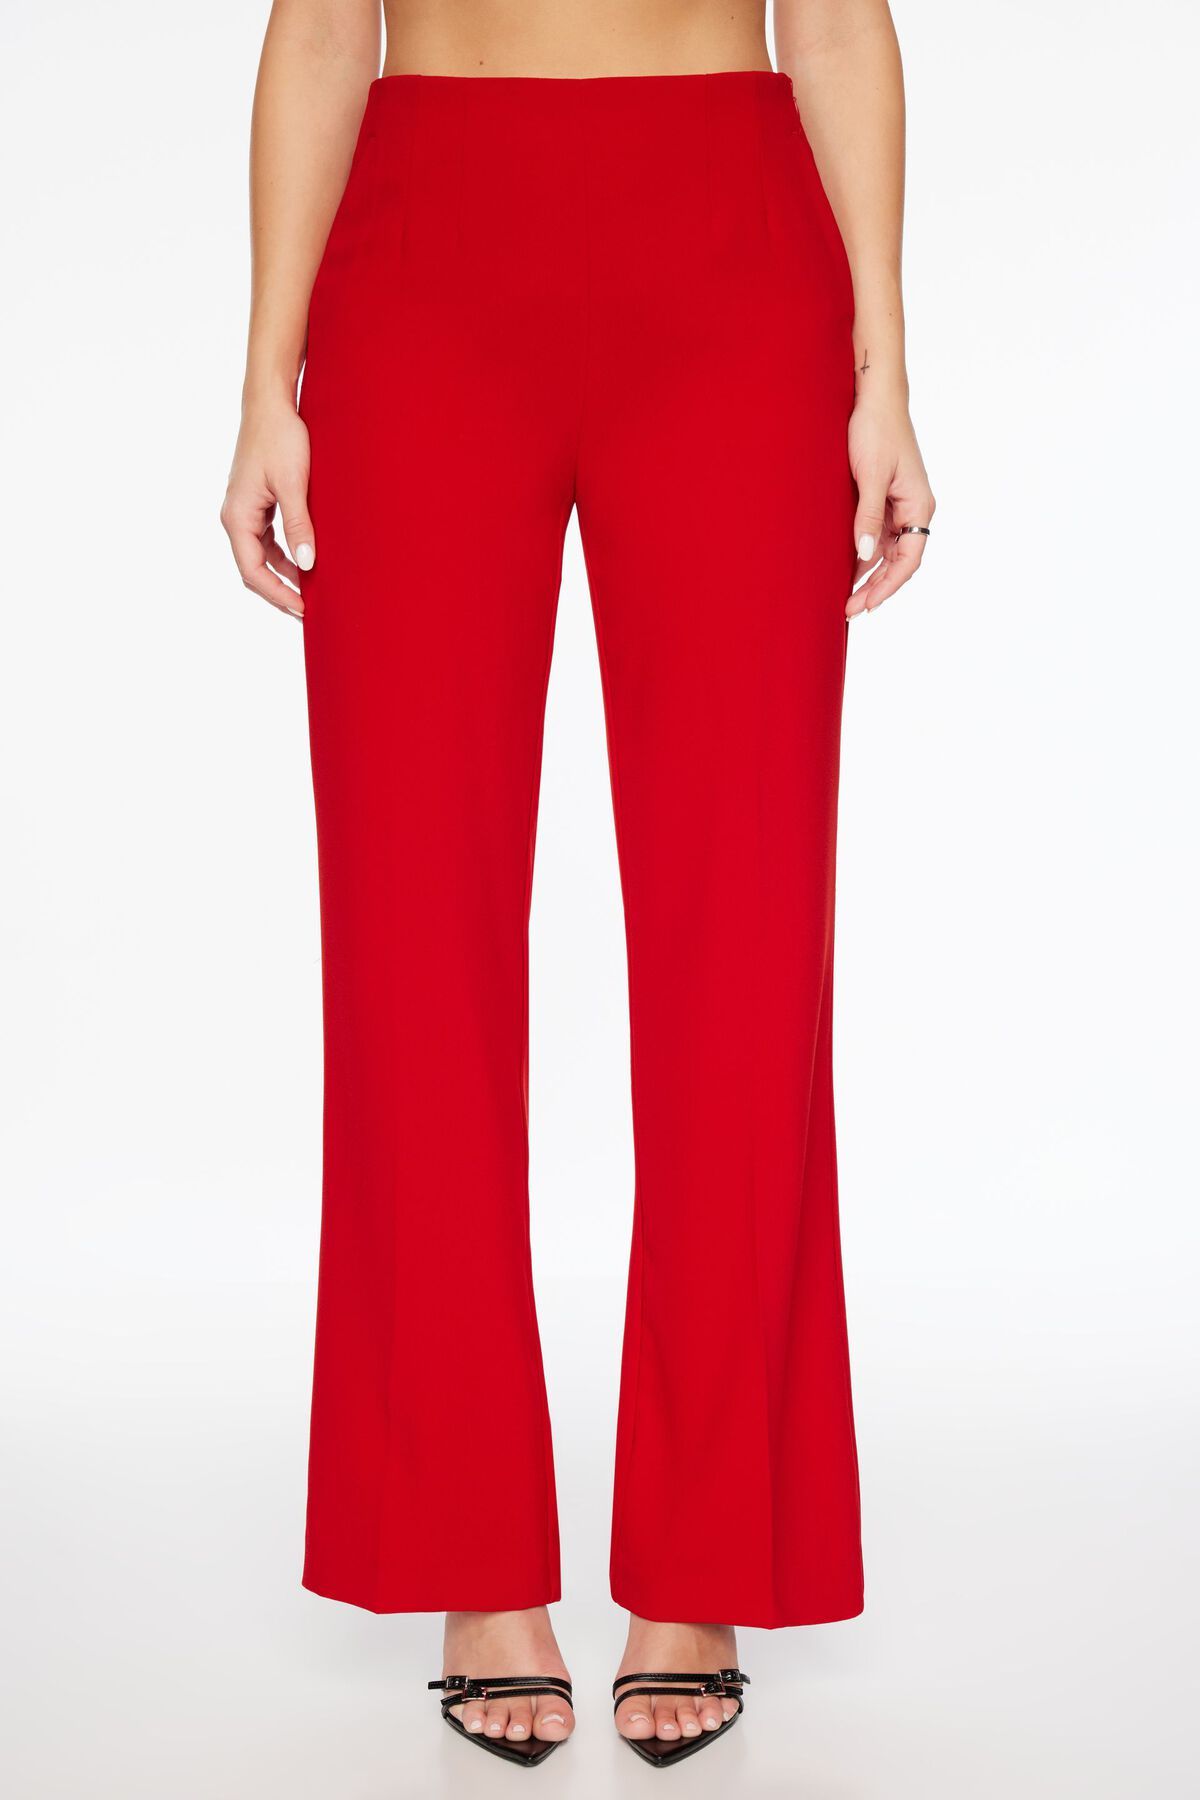 Opportune Moment Red Wide Leg Trouser Pants  Red wide leg trousers, Career  outfits, Wide leg trouser